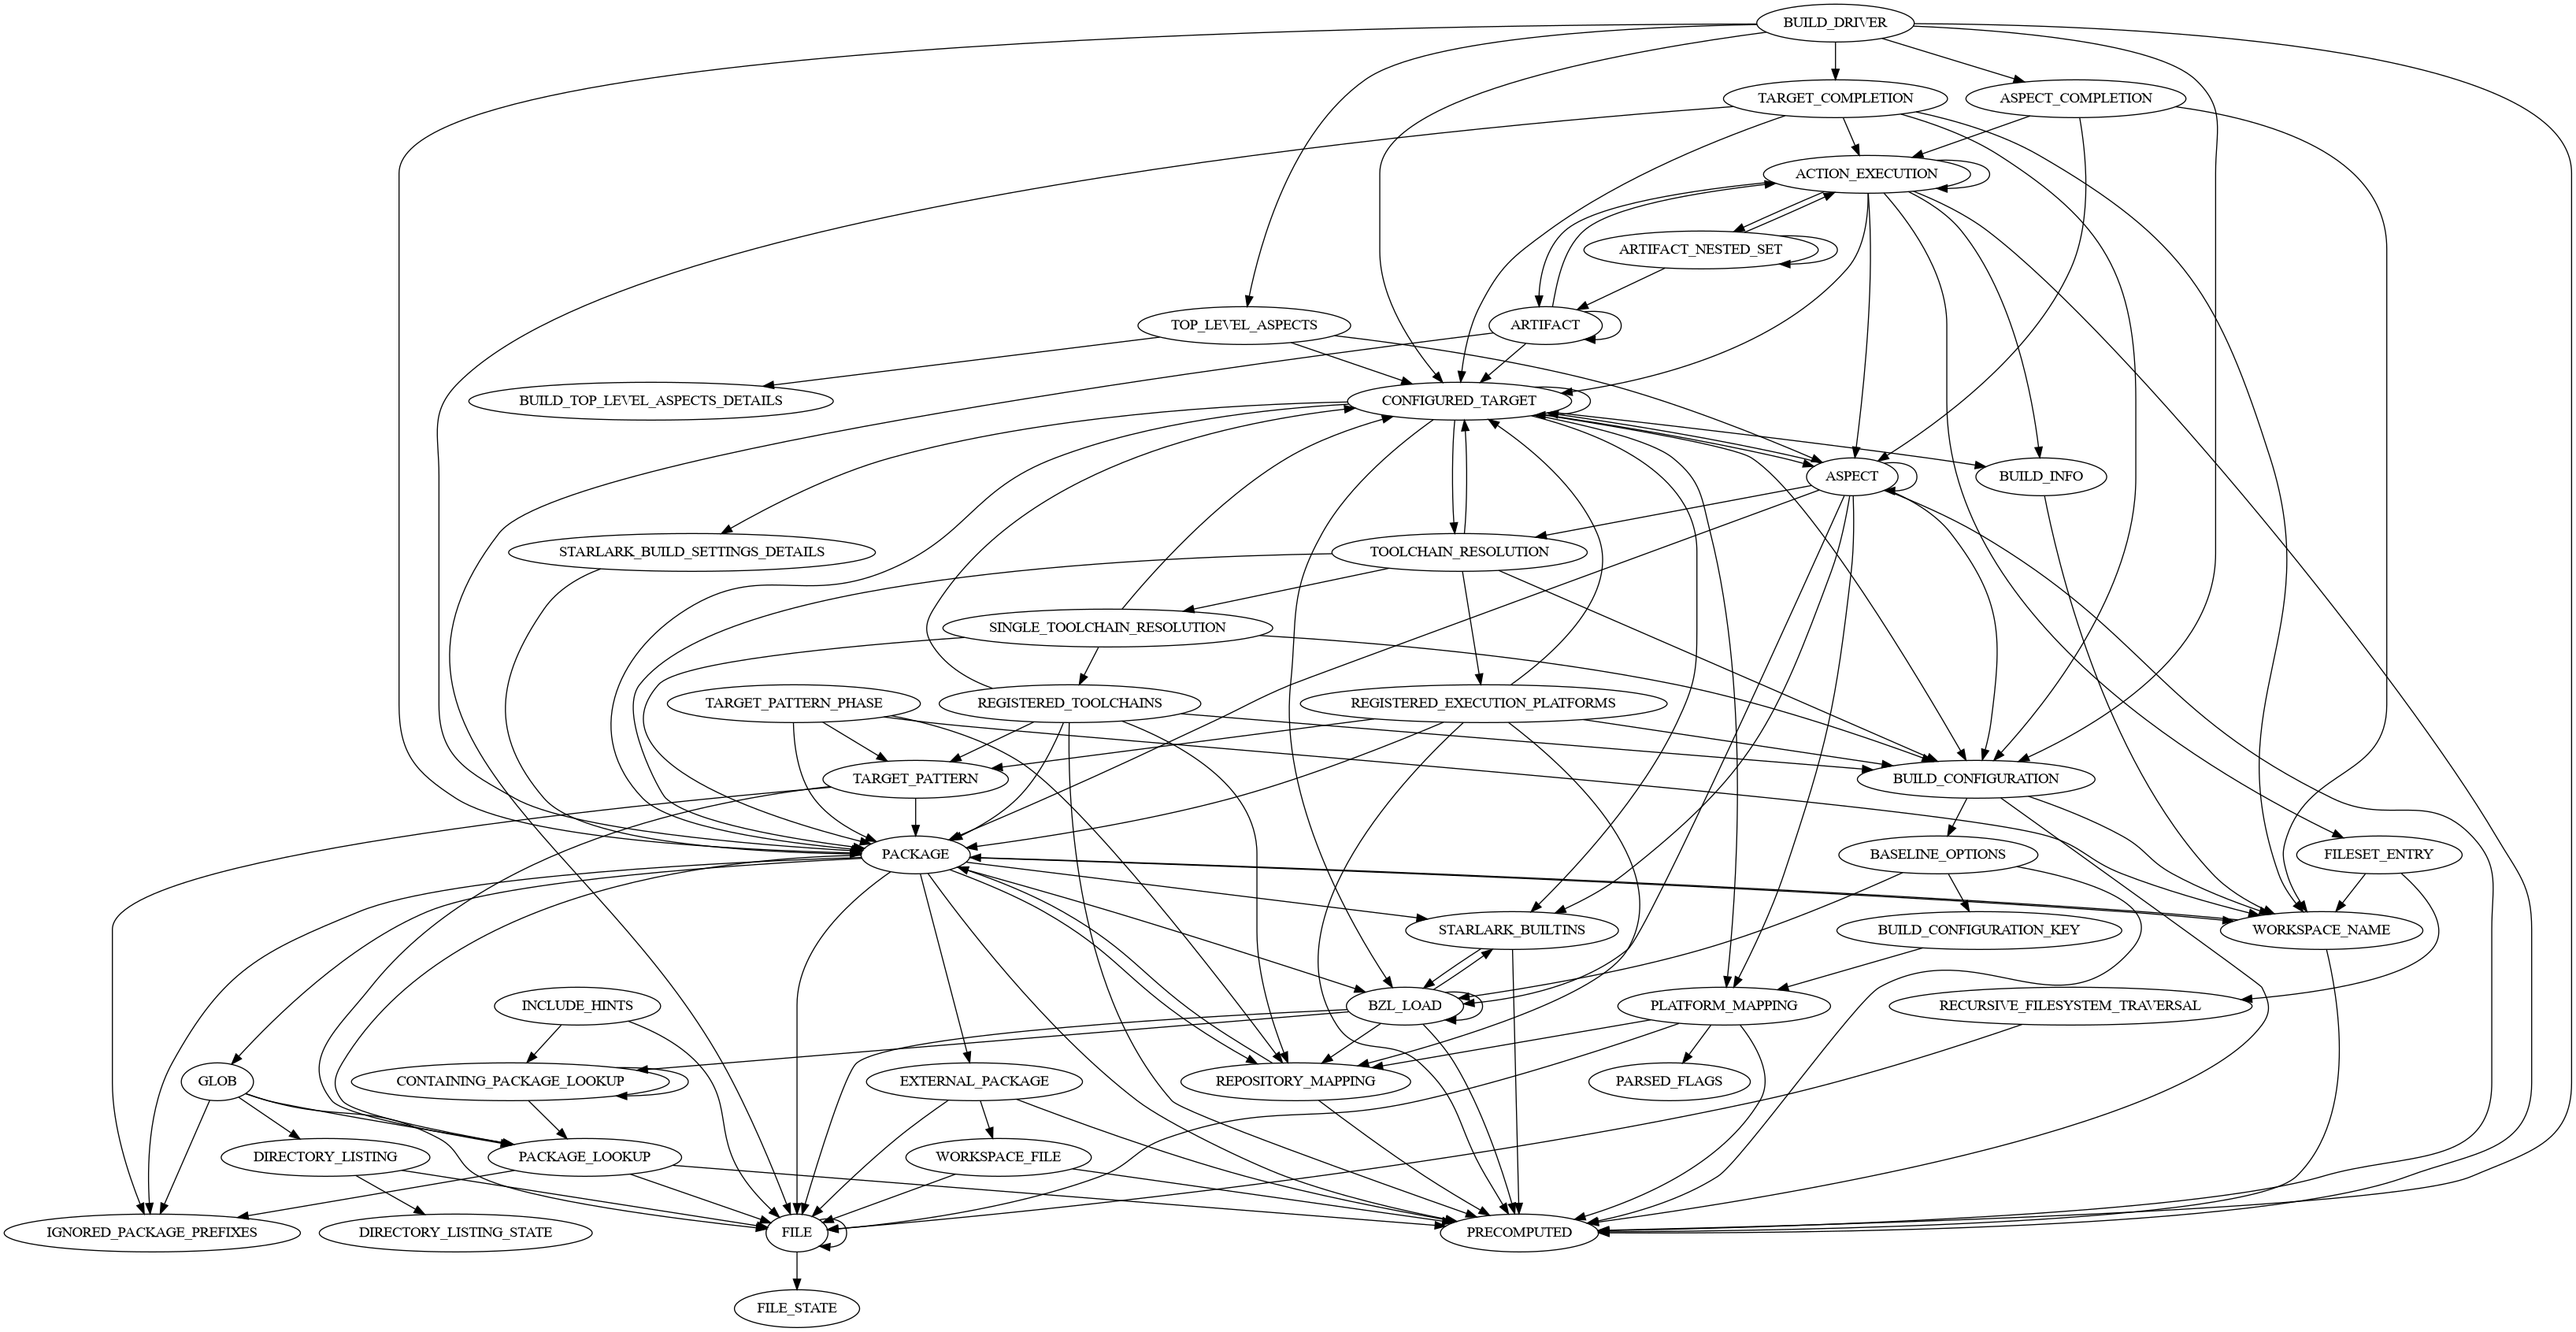 A graph of SkyFunction implementation relationships